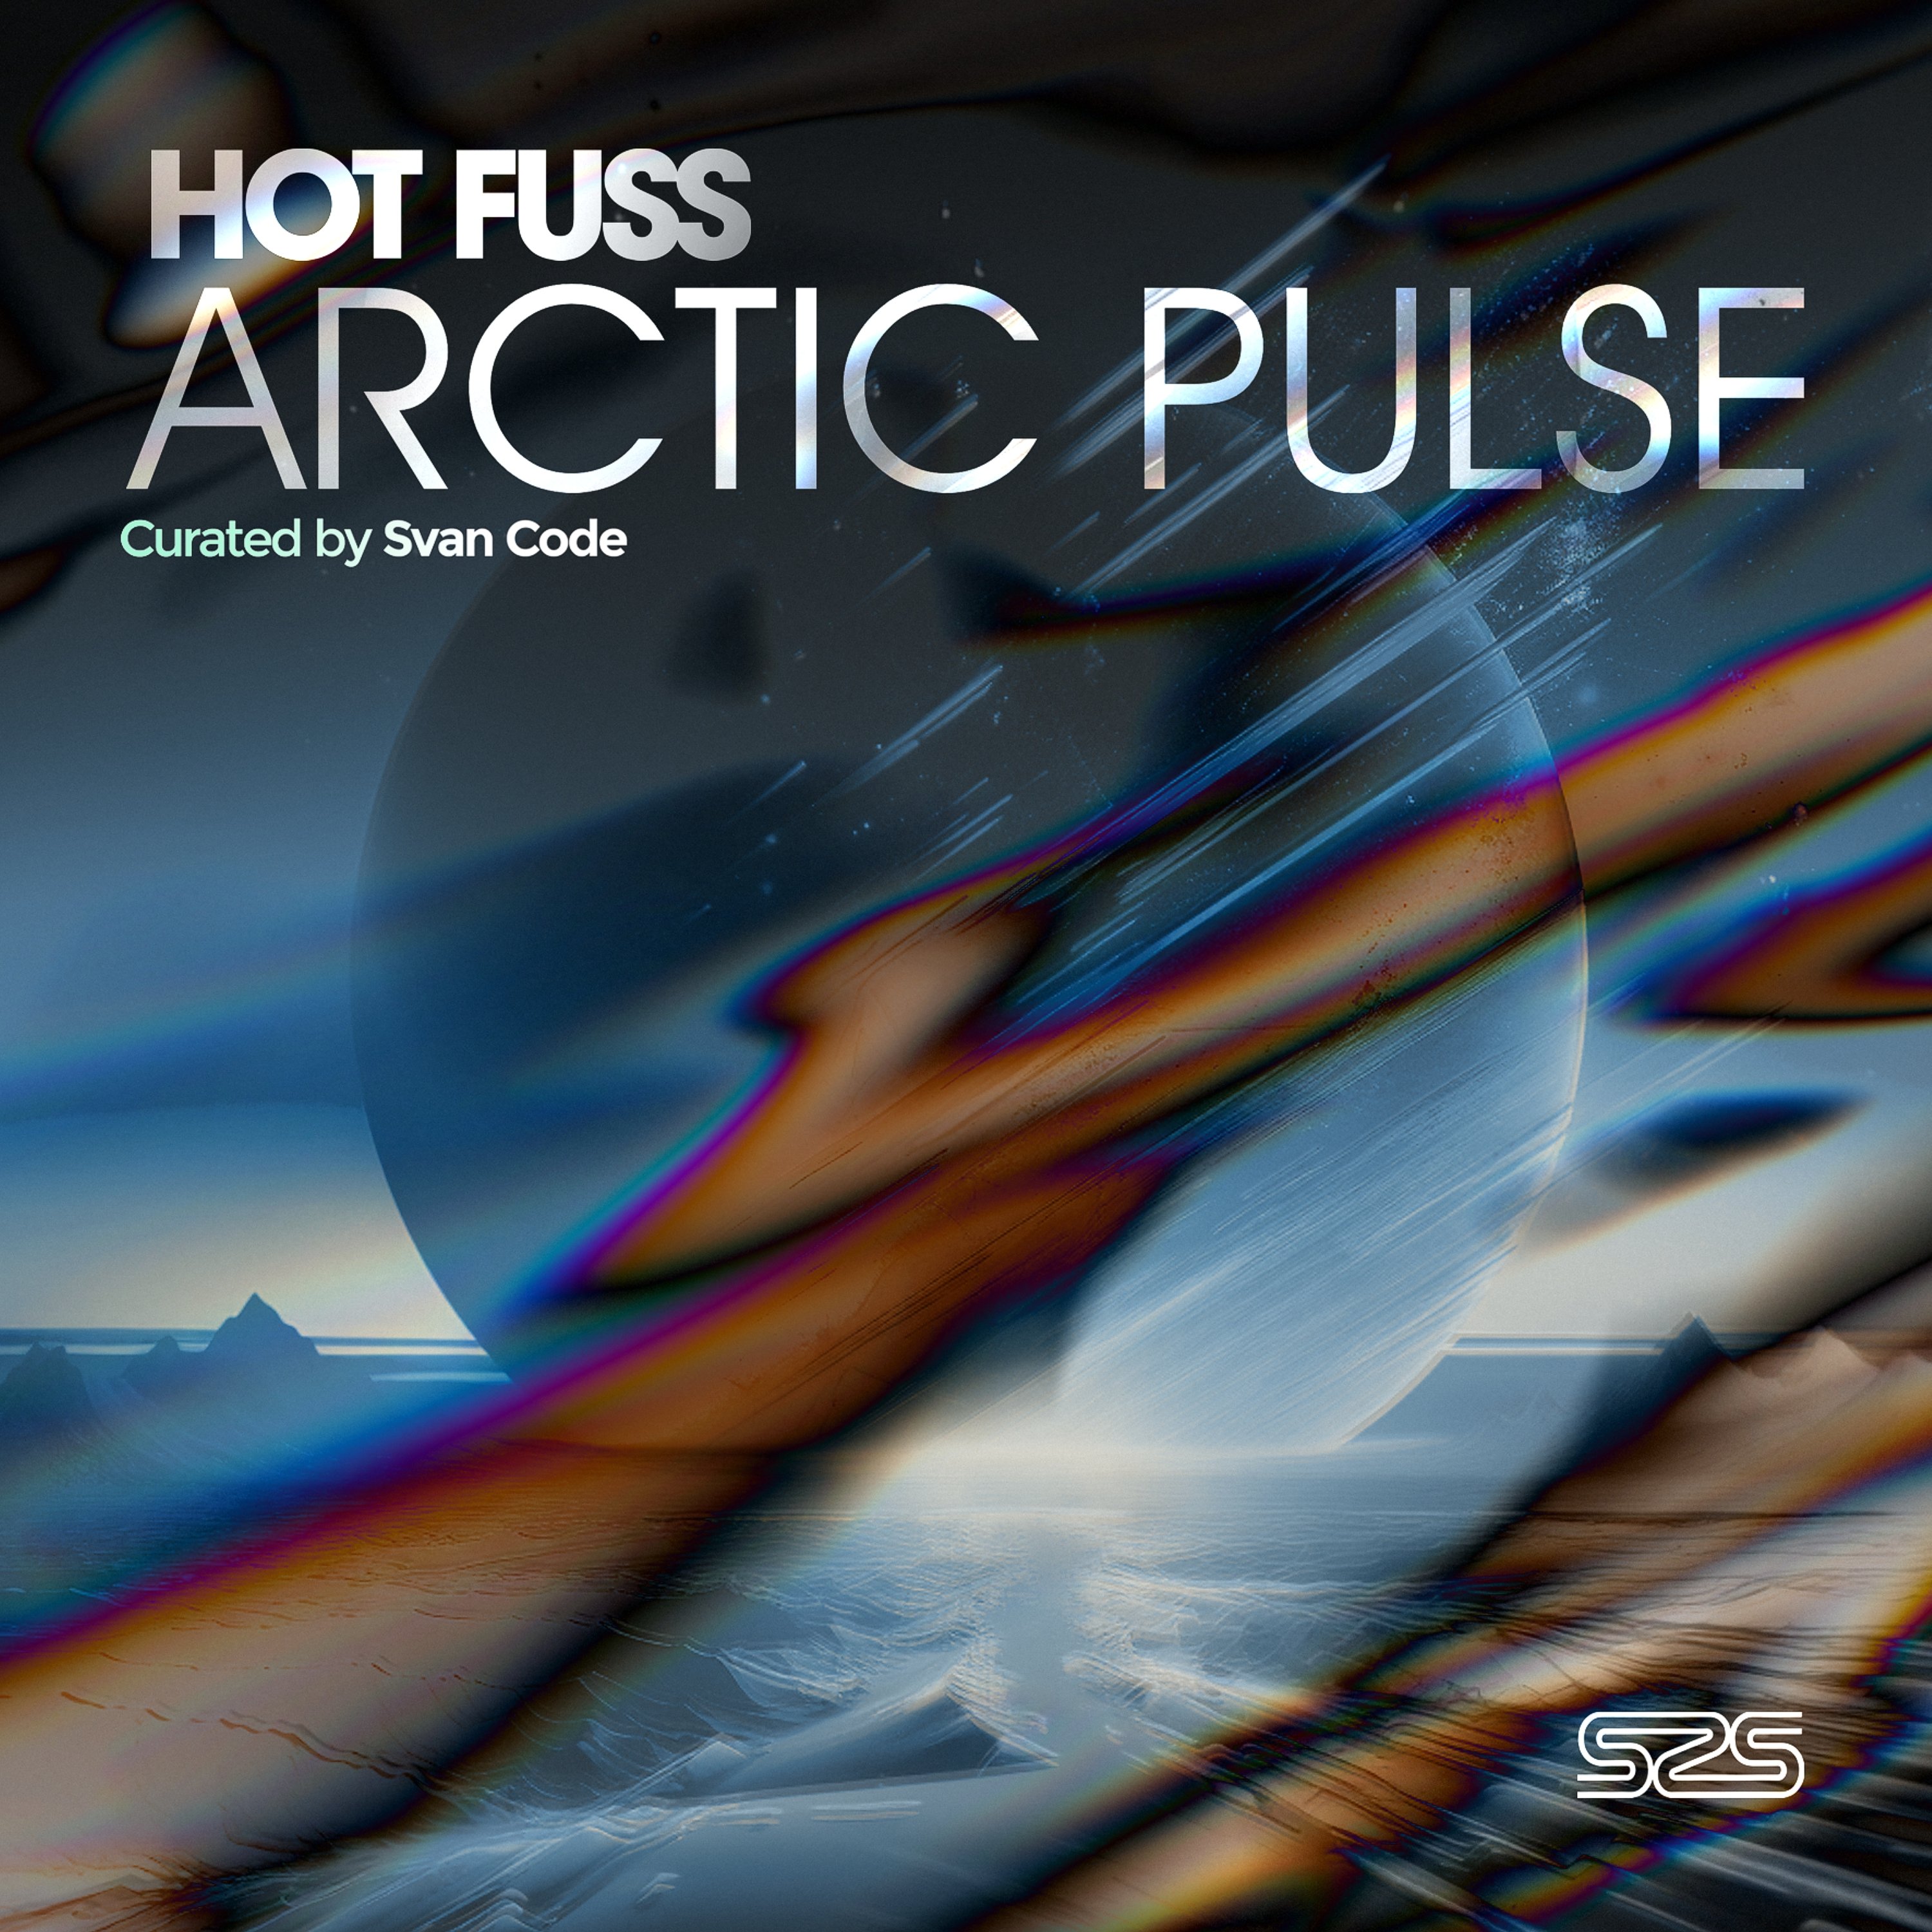 Arctic Pulse curated by Svan Code